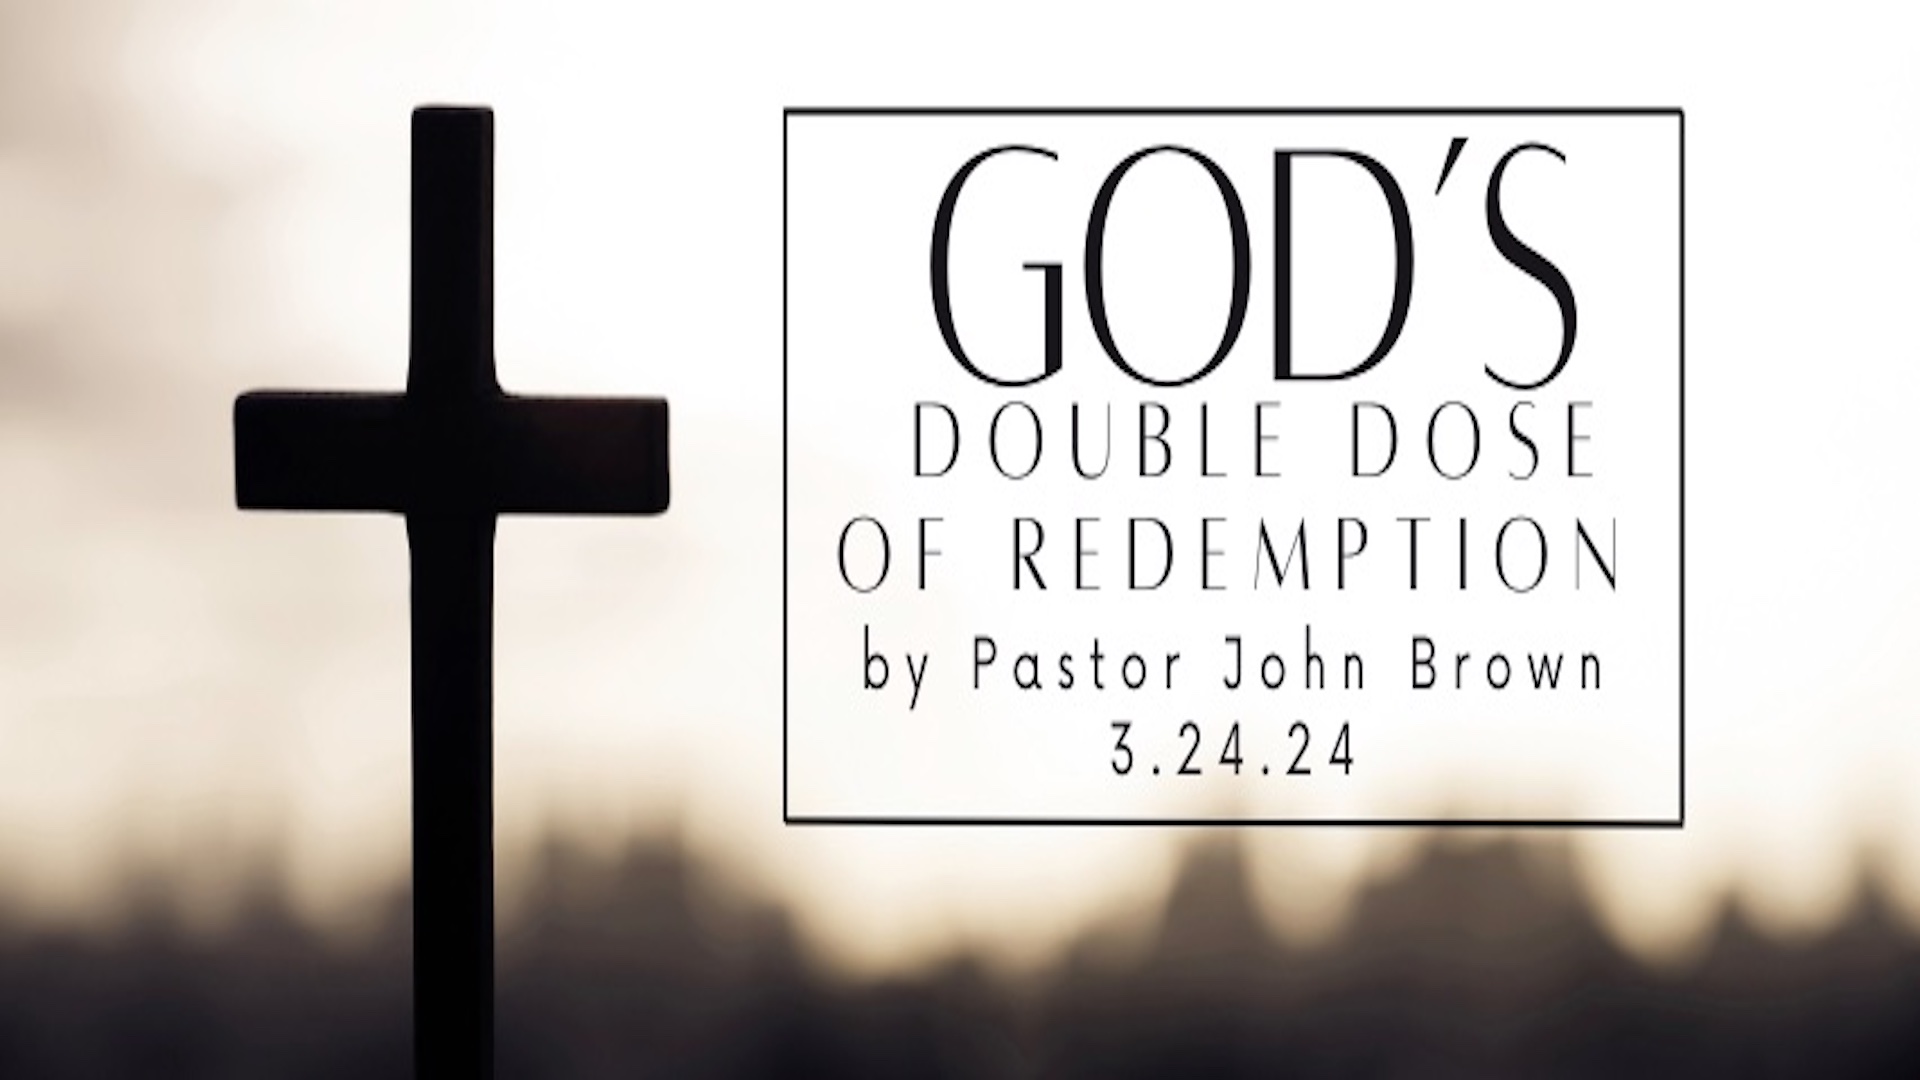 God’s Double Dose of Redemption